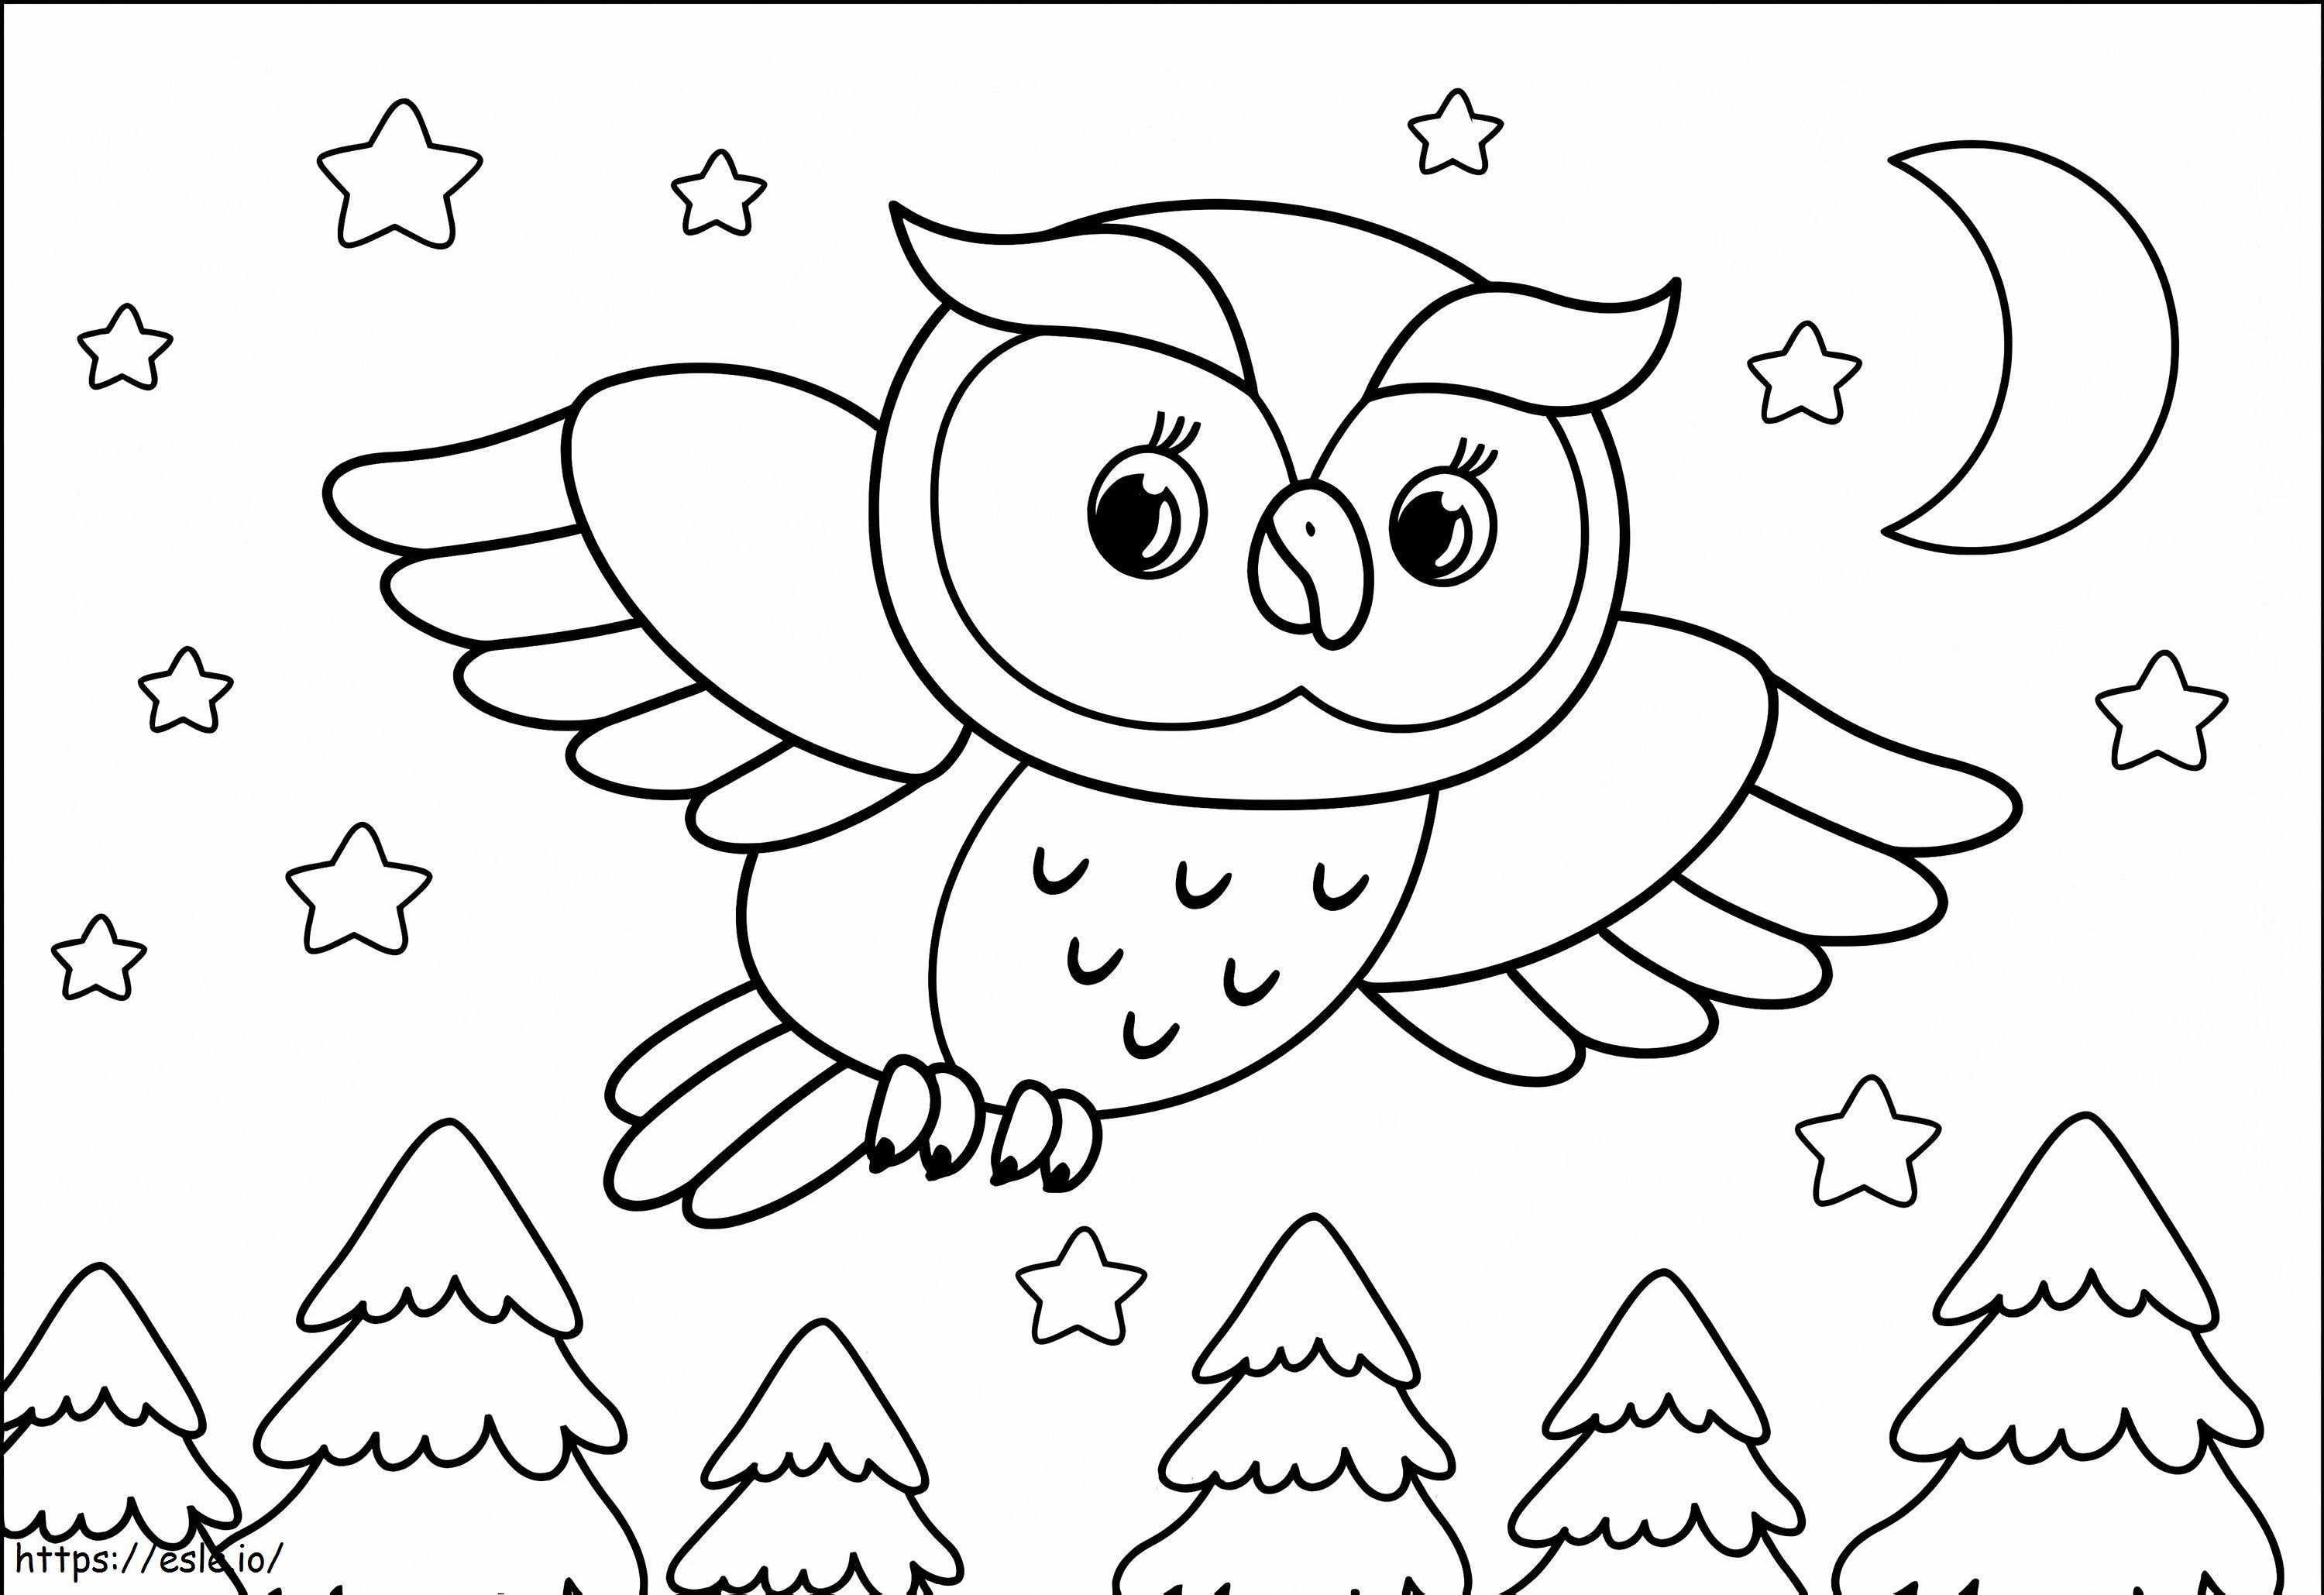 Owl 6 coloring page